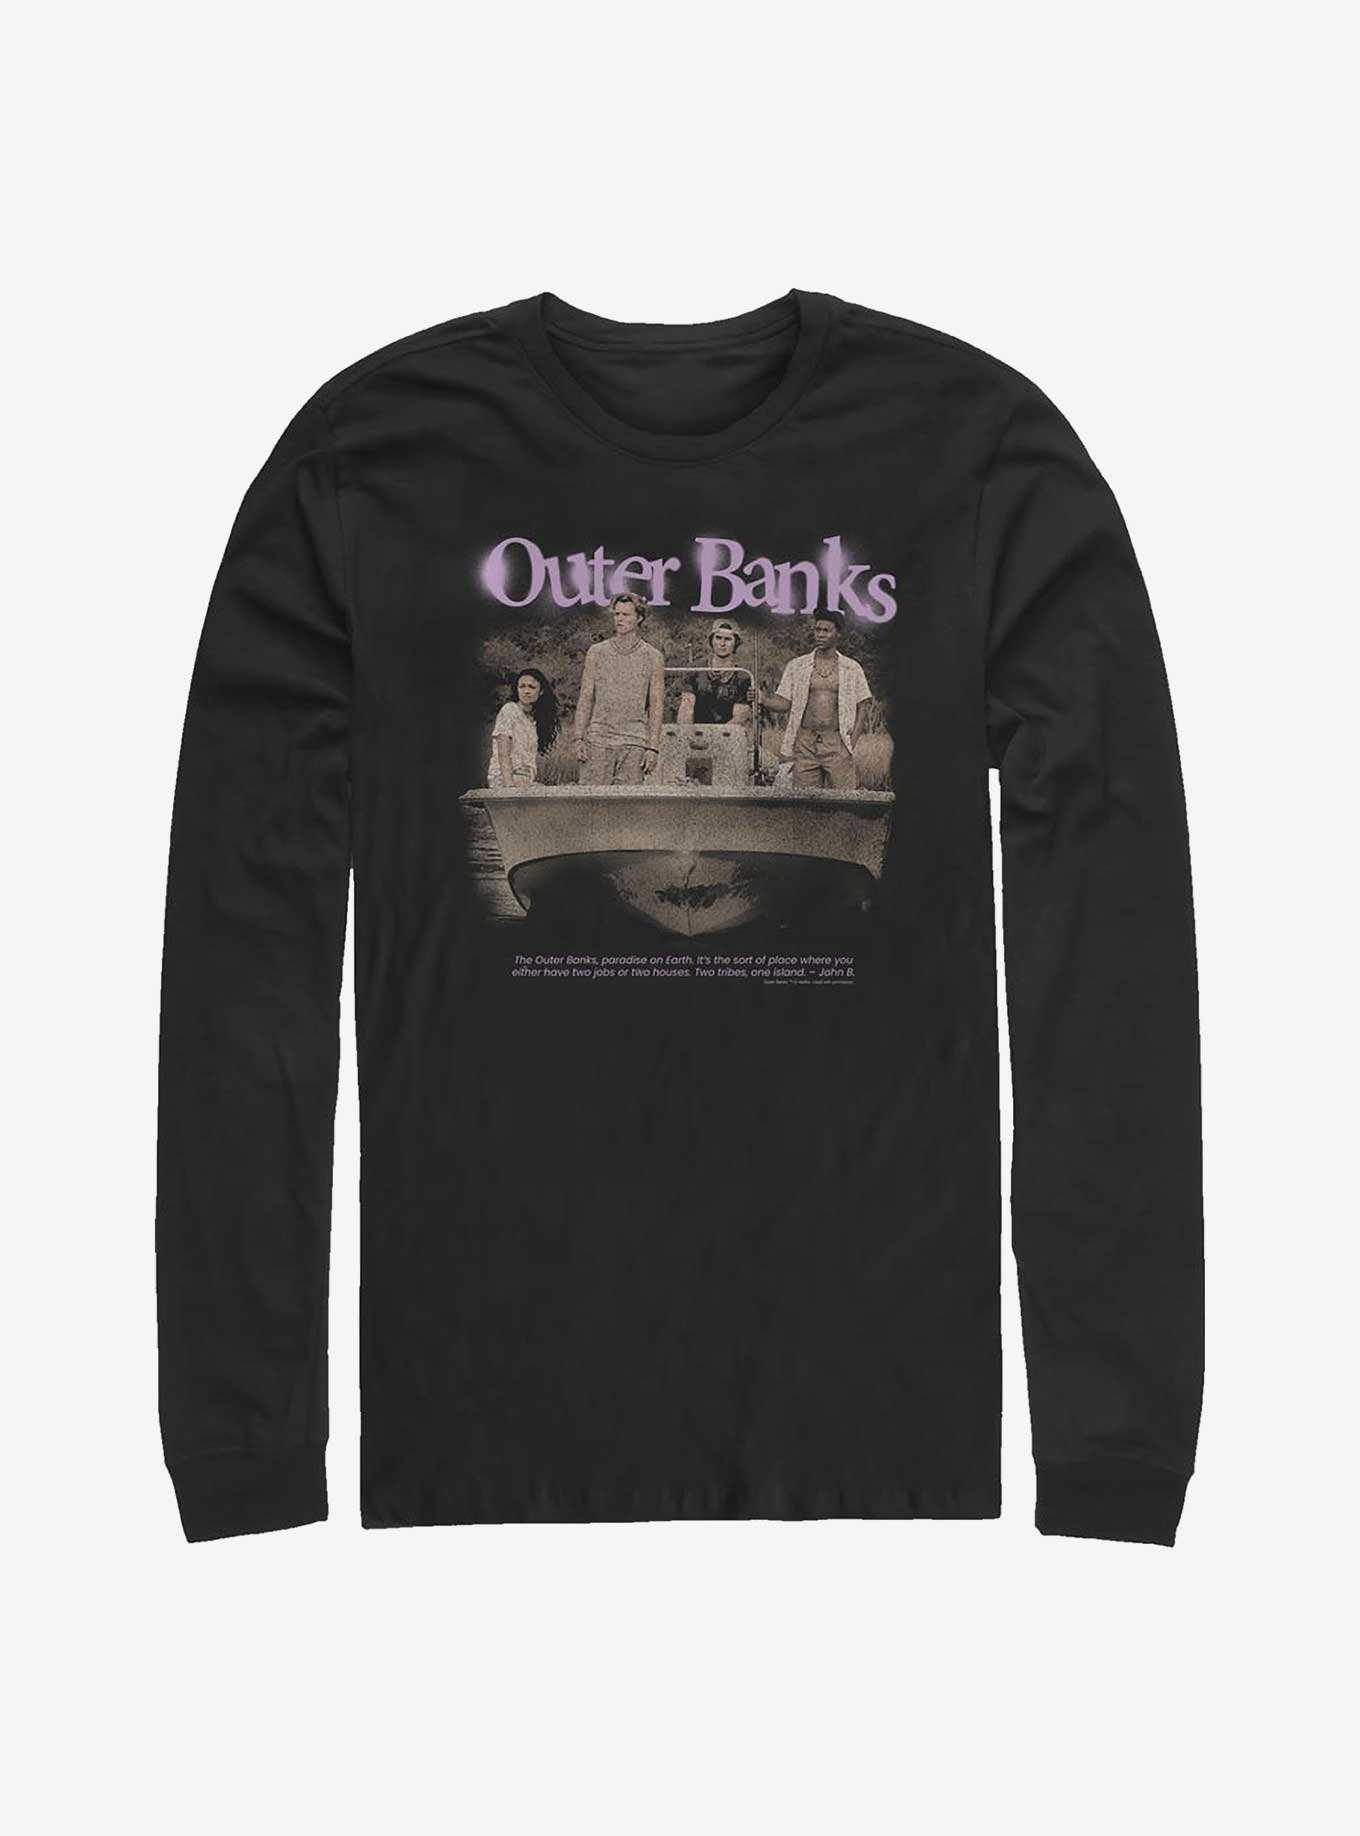 Outer Banks Spray Paint Long-Sleeve T-Shirt, , hi-res